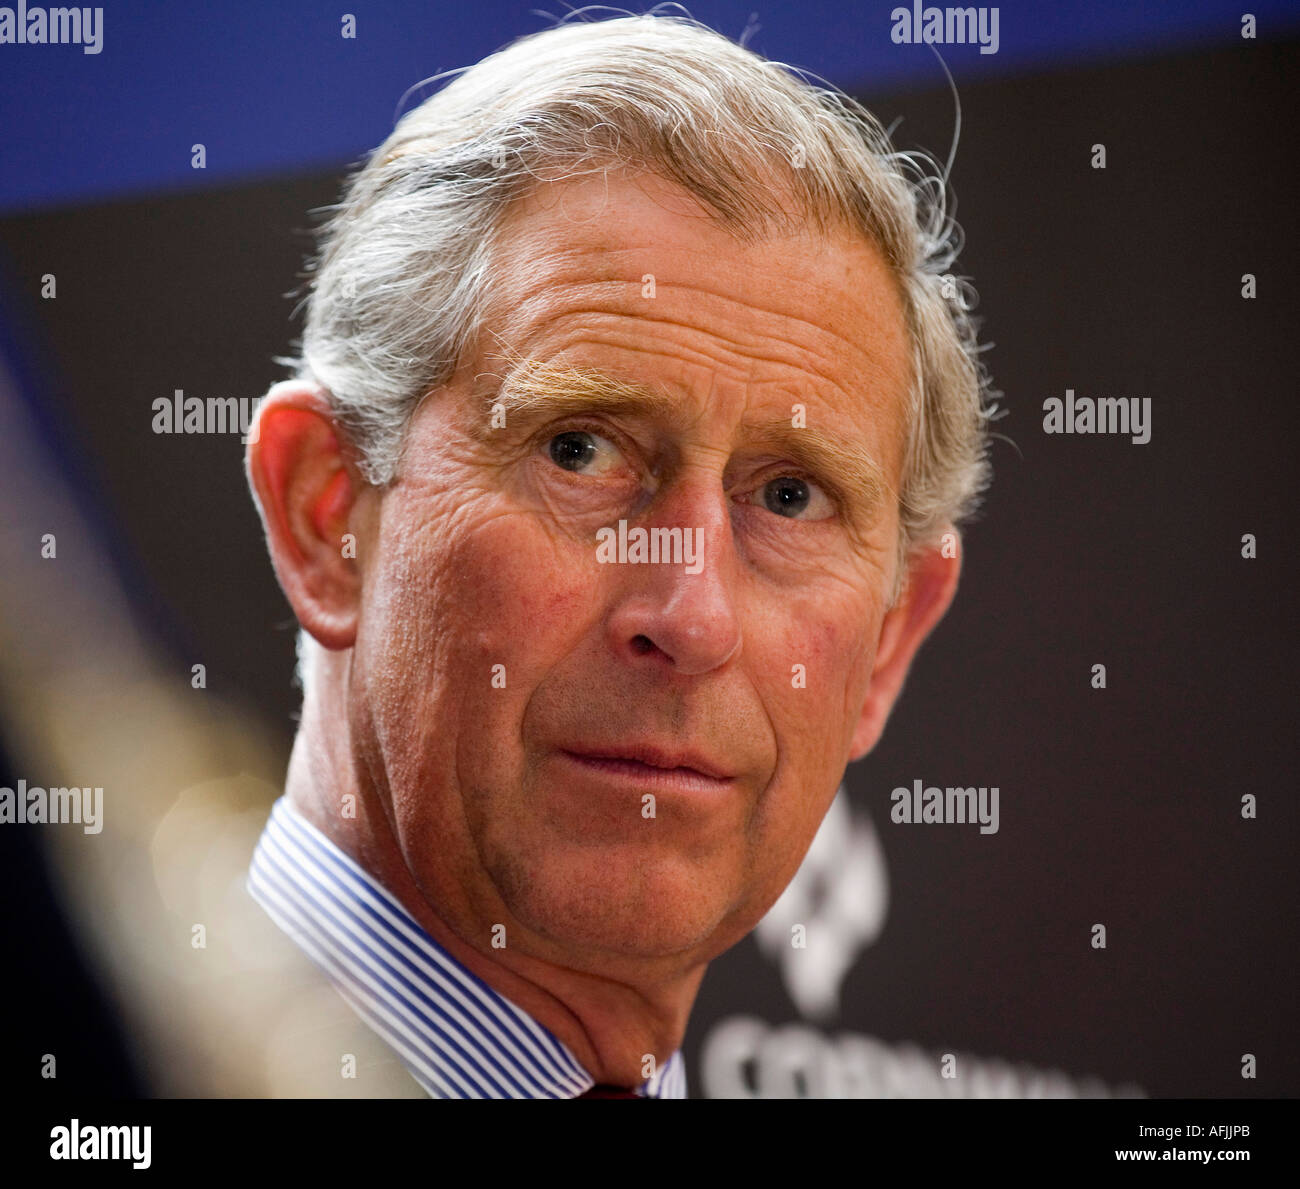 Charles III  King of the United Kingdom and the 14 other Commonwealth realms. Stock Photo